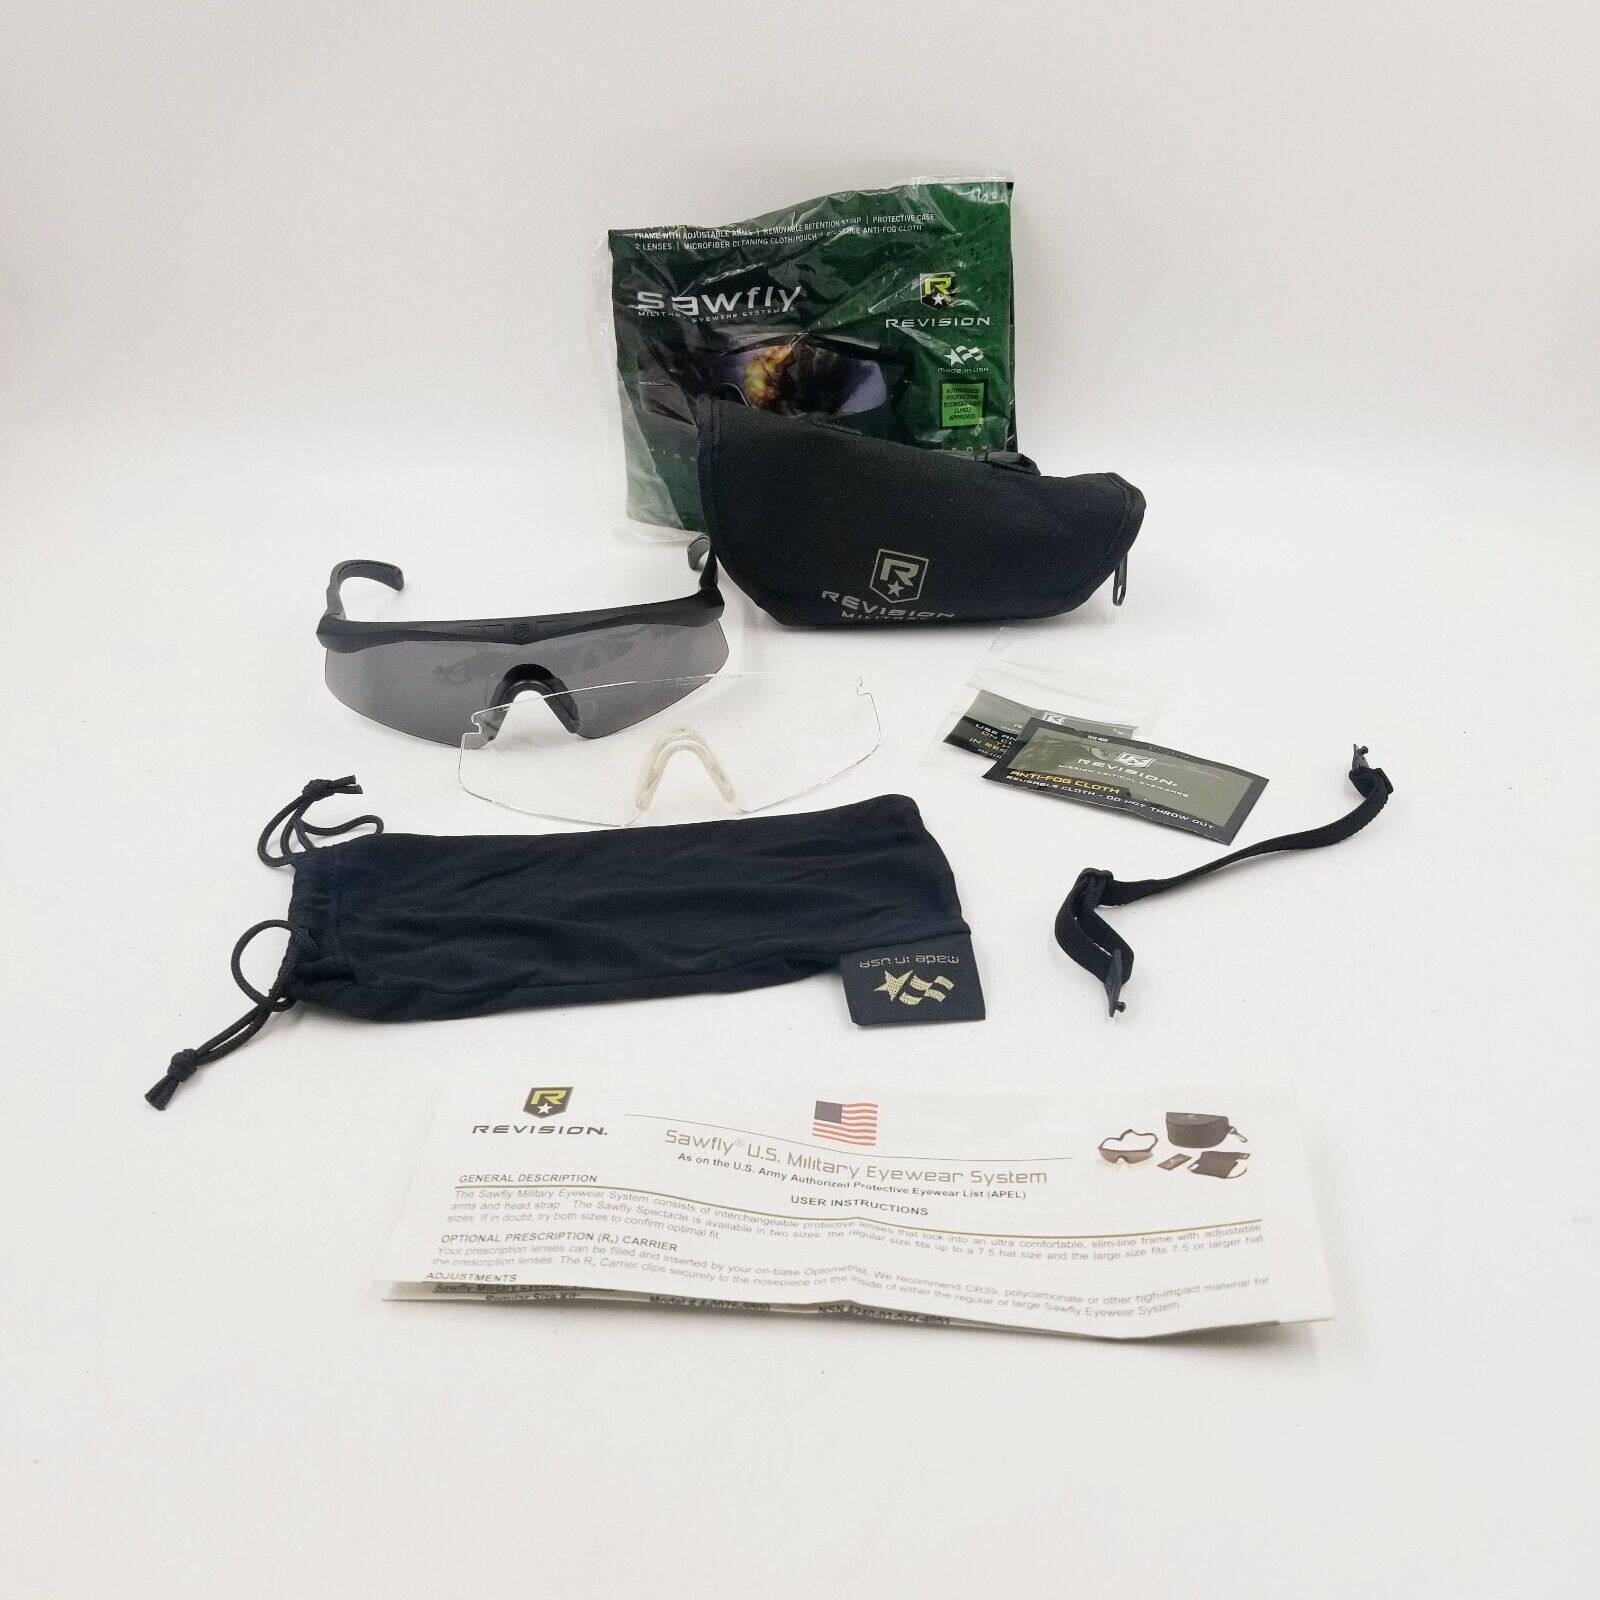 USGI Army Contract Revision Sawfly APEL Protective Glasses w/case Regular Size